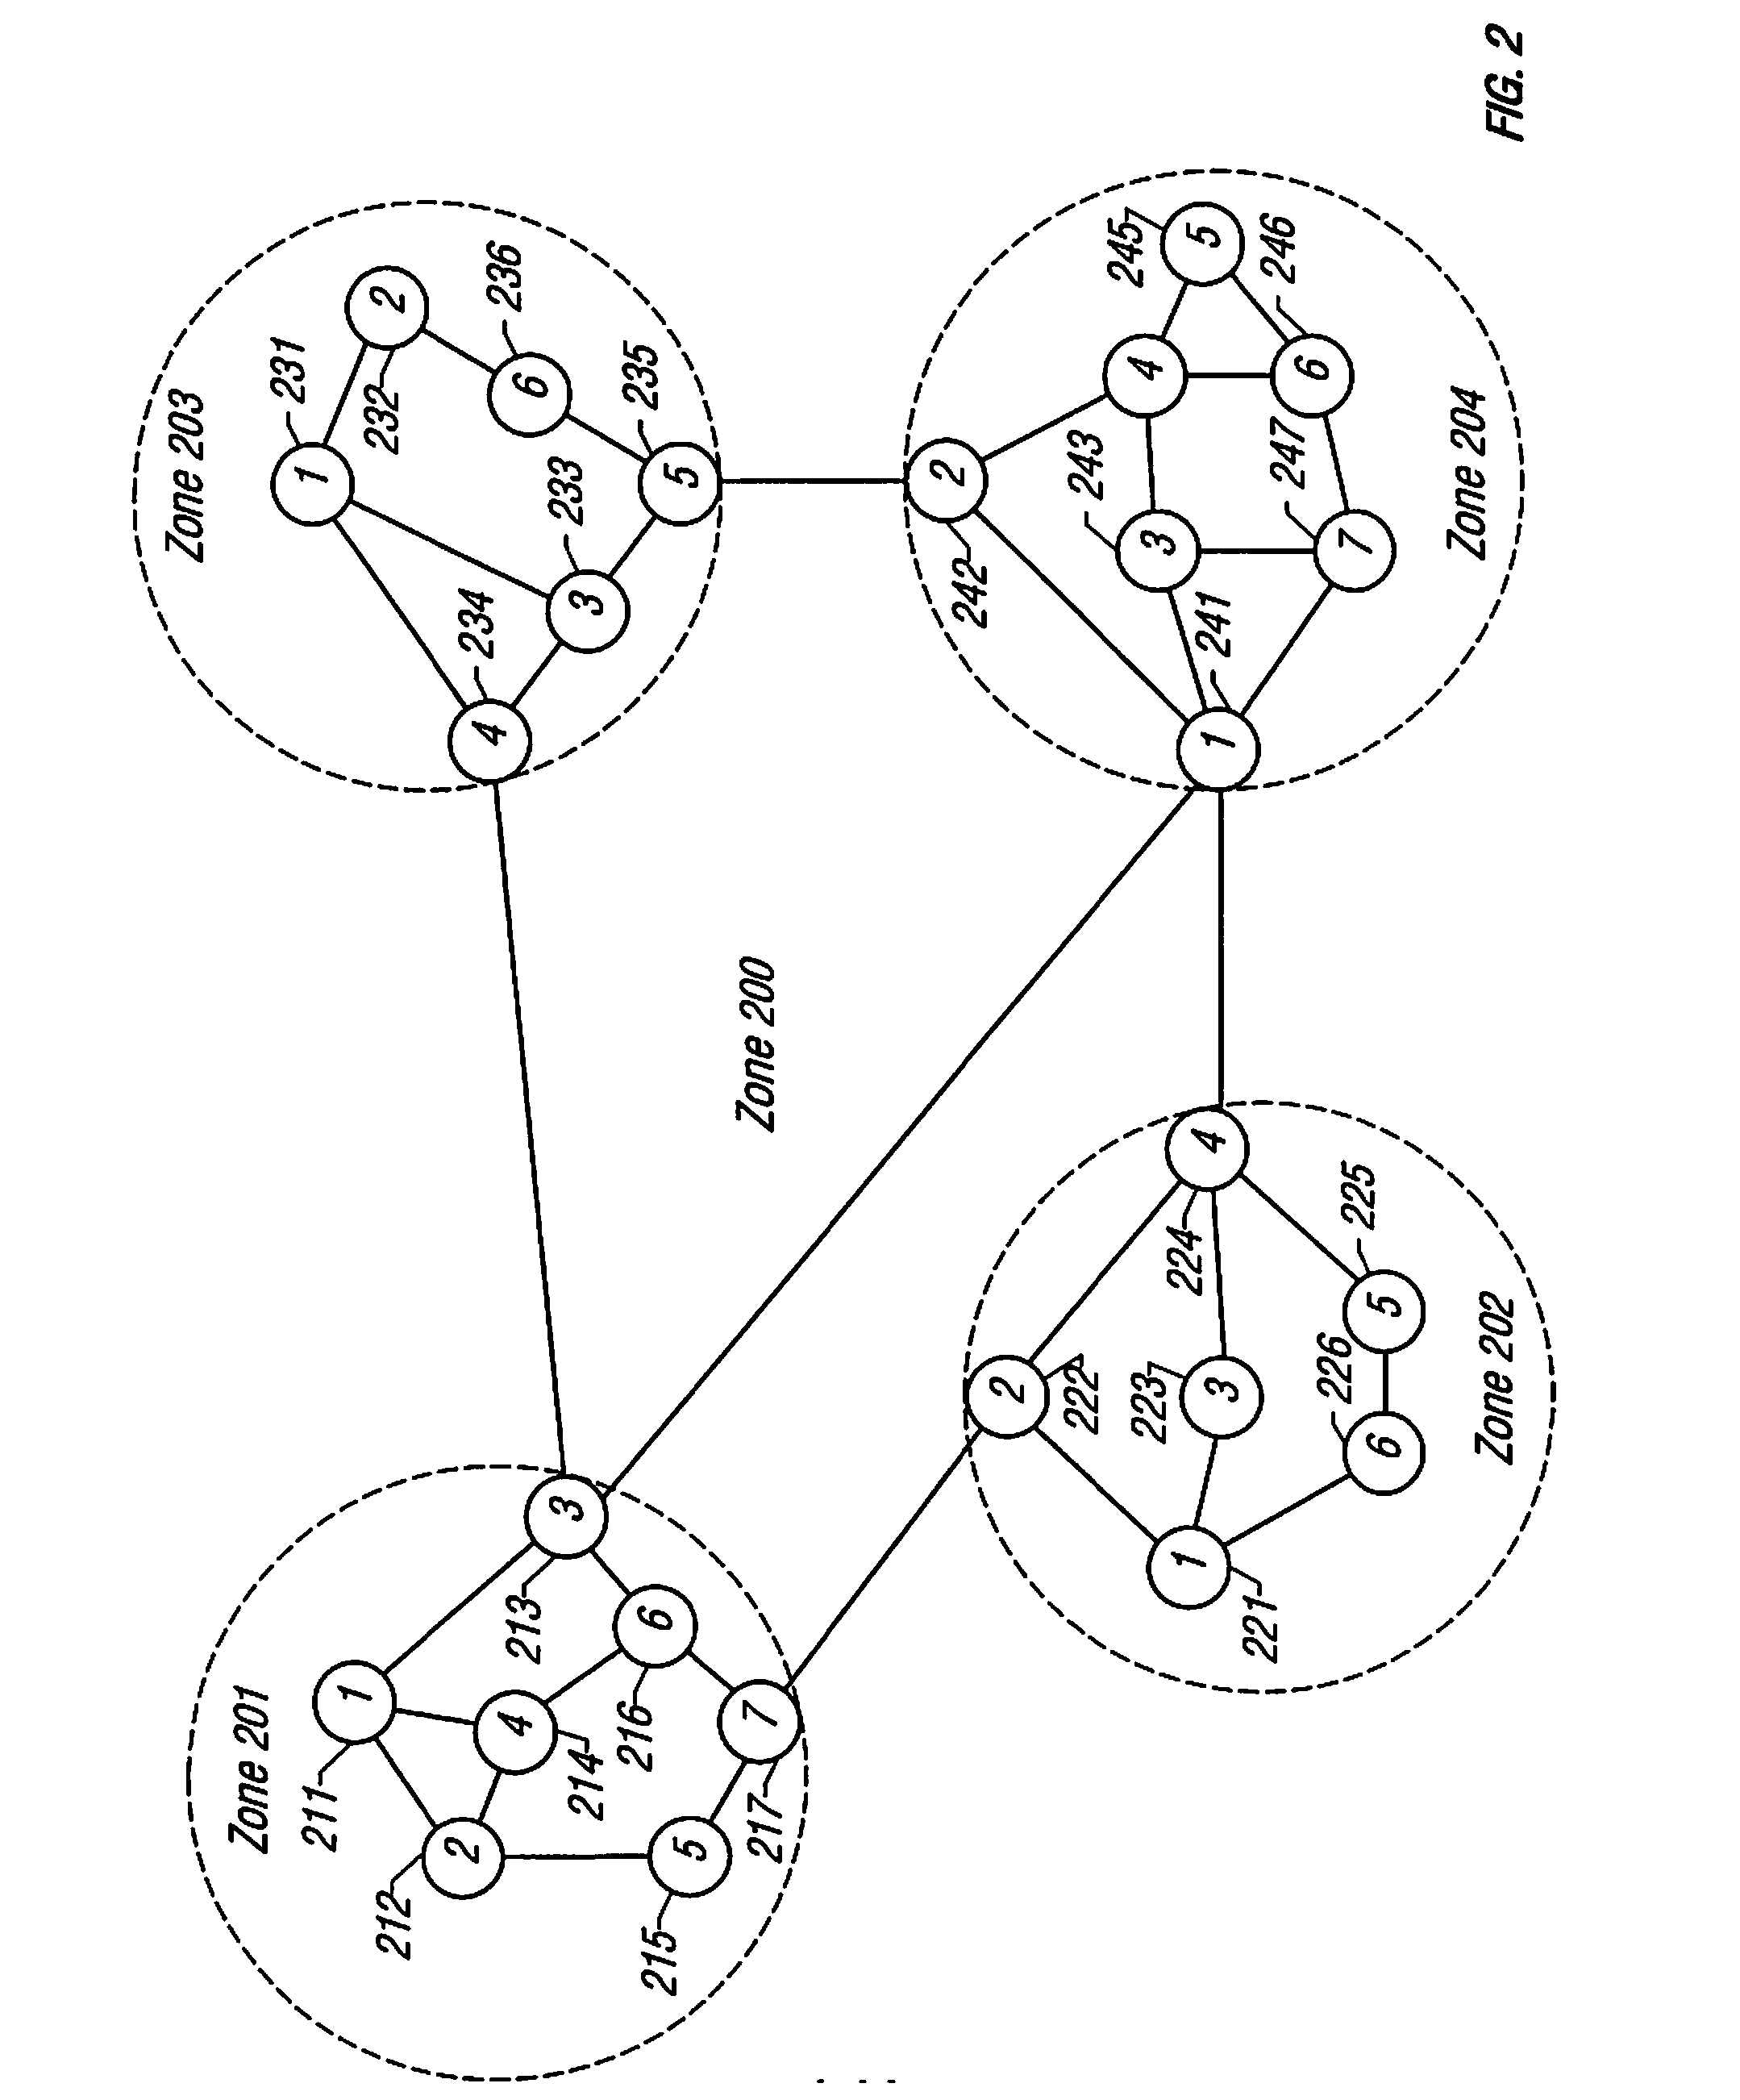 Method for routing information over a network employing centralized control